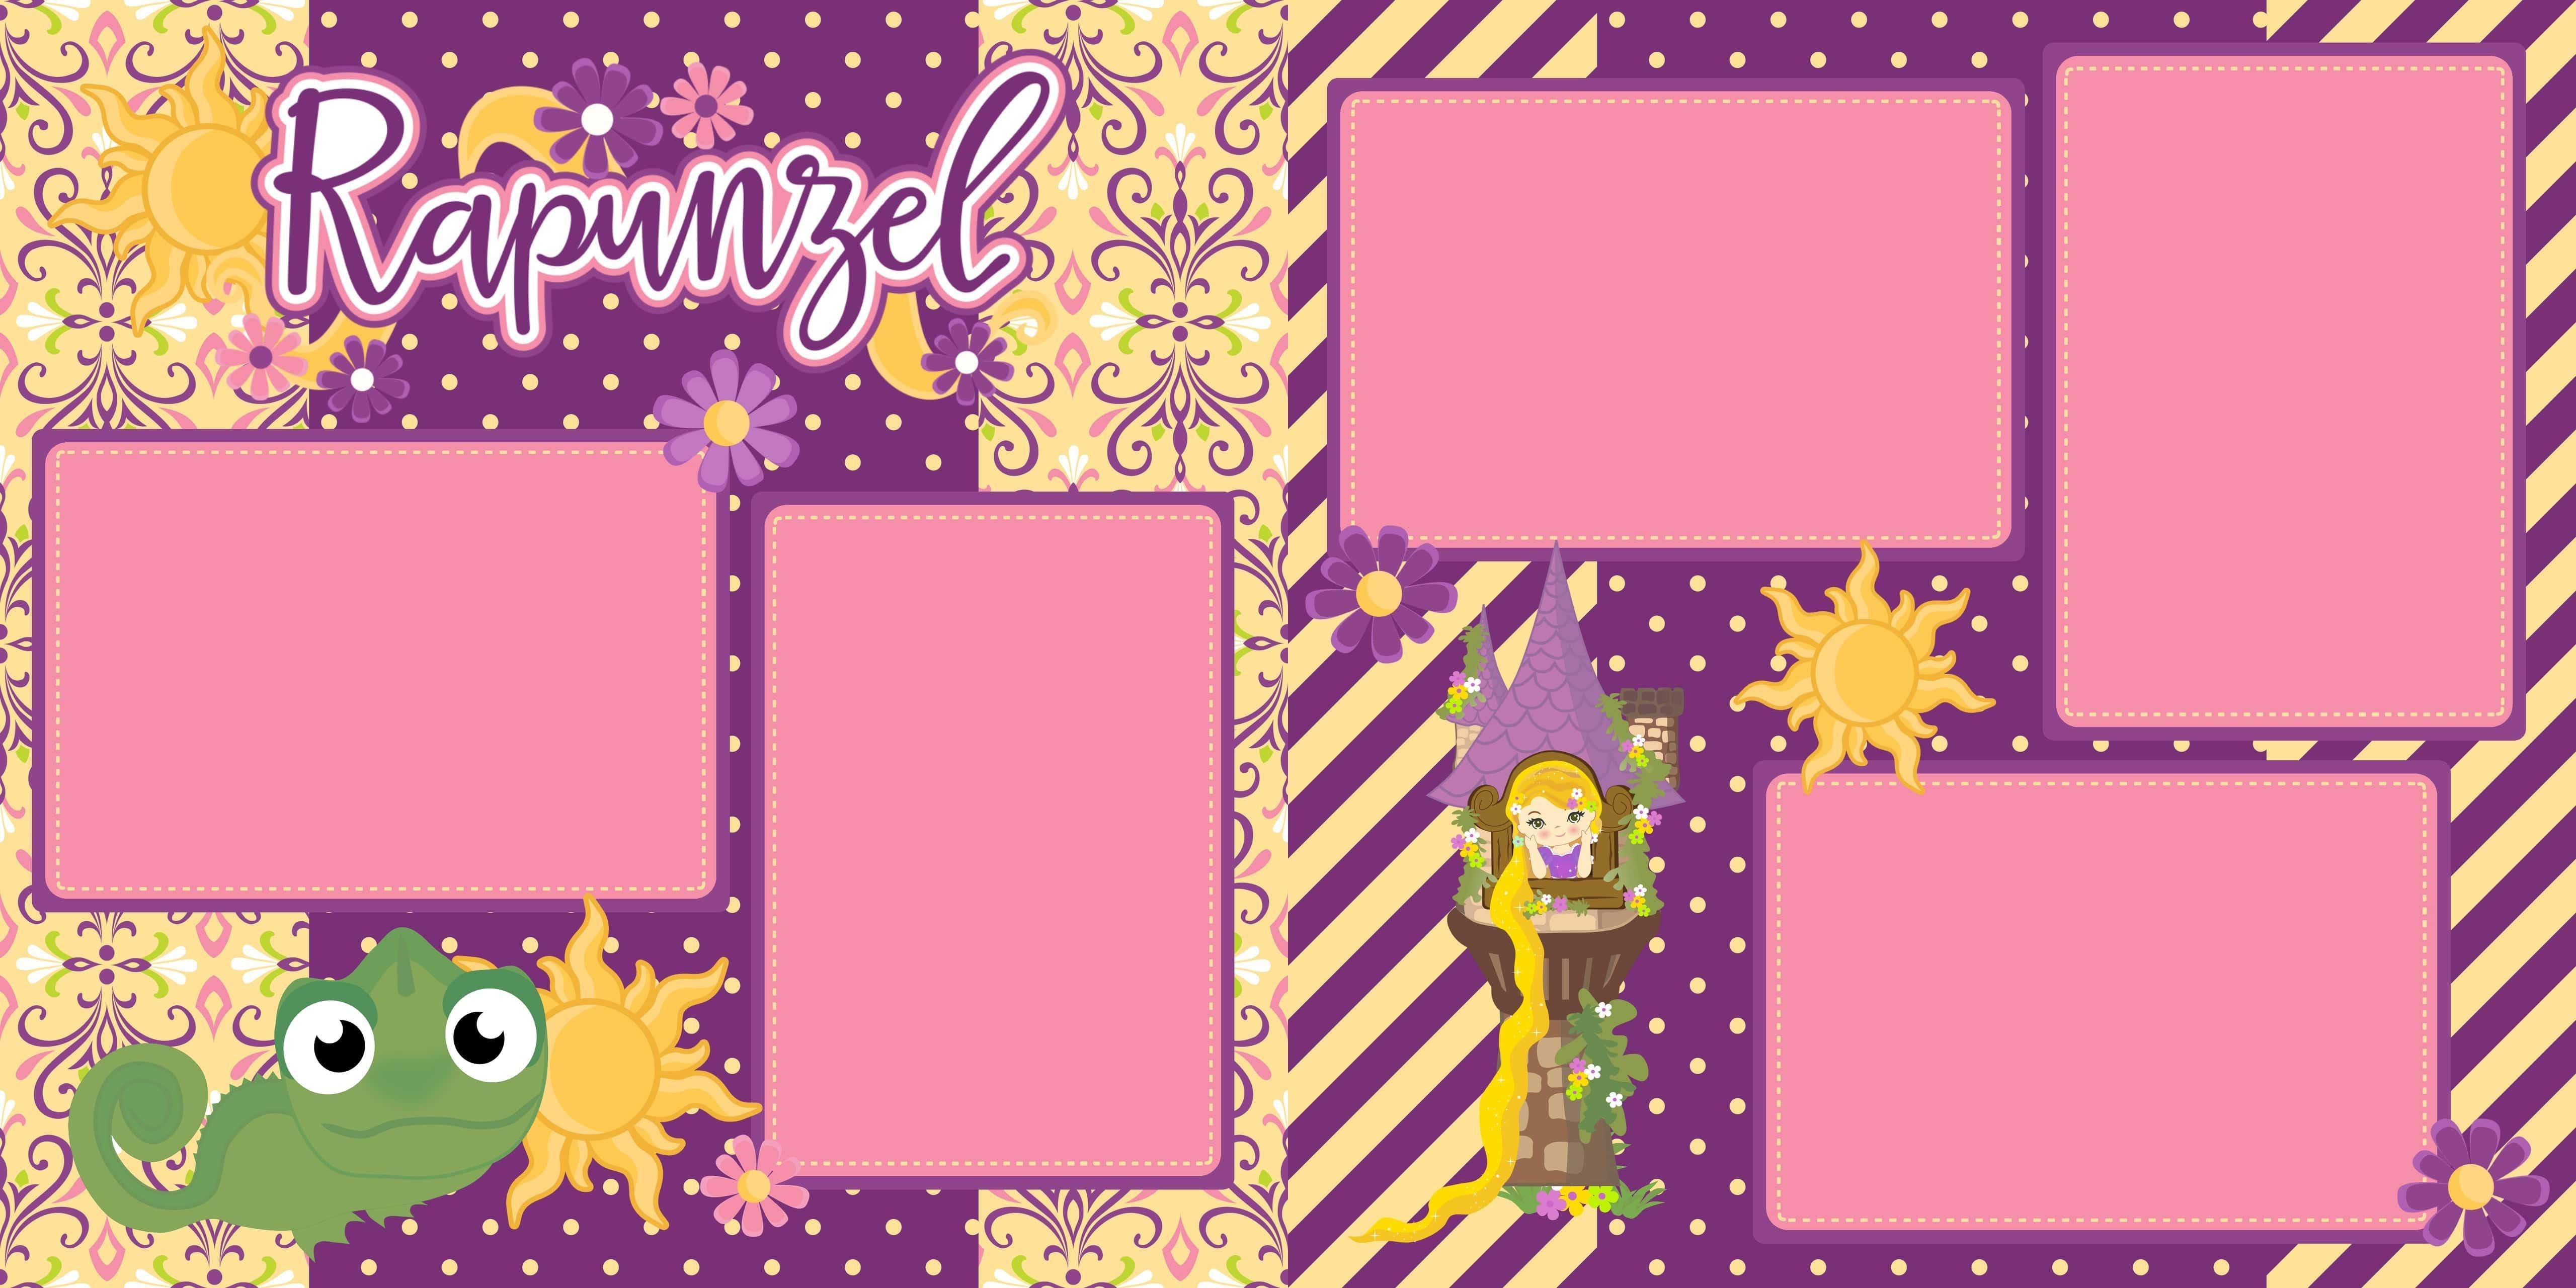 Rapunzel (2) - 12 x 12 Premade, Printed Scrapbook Pages by SSC Designs